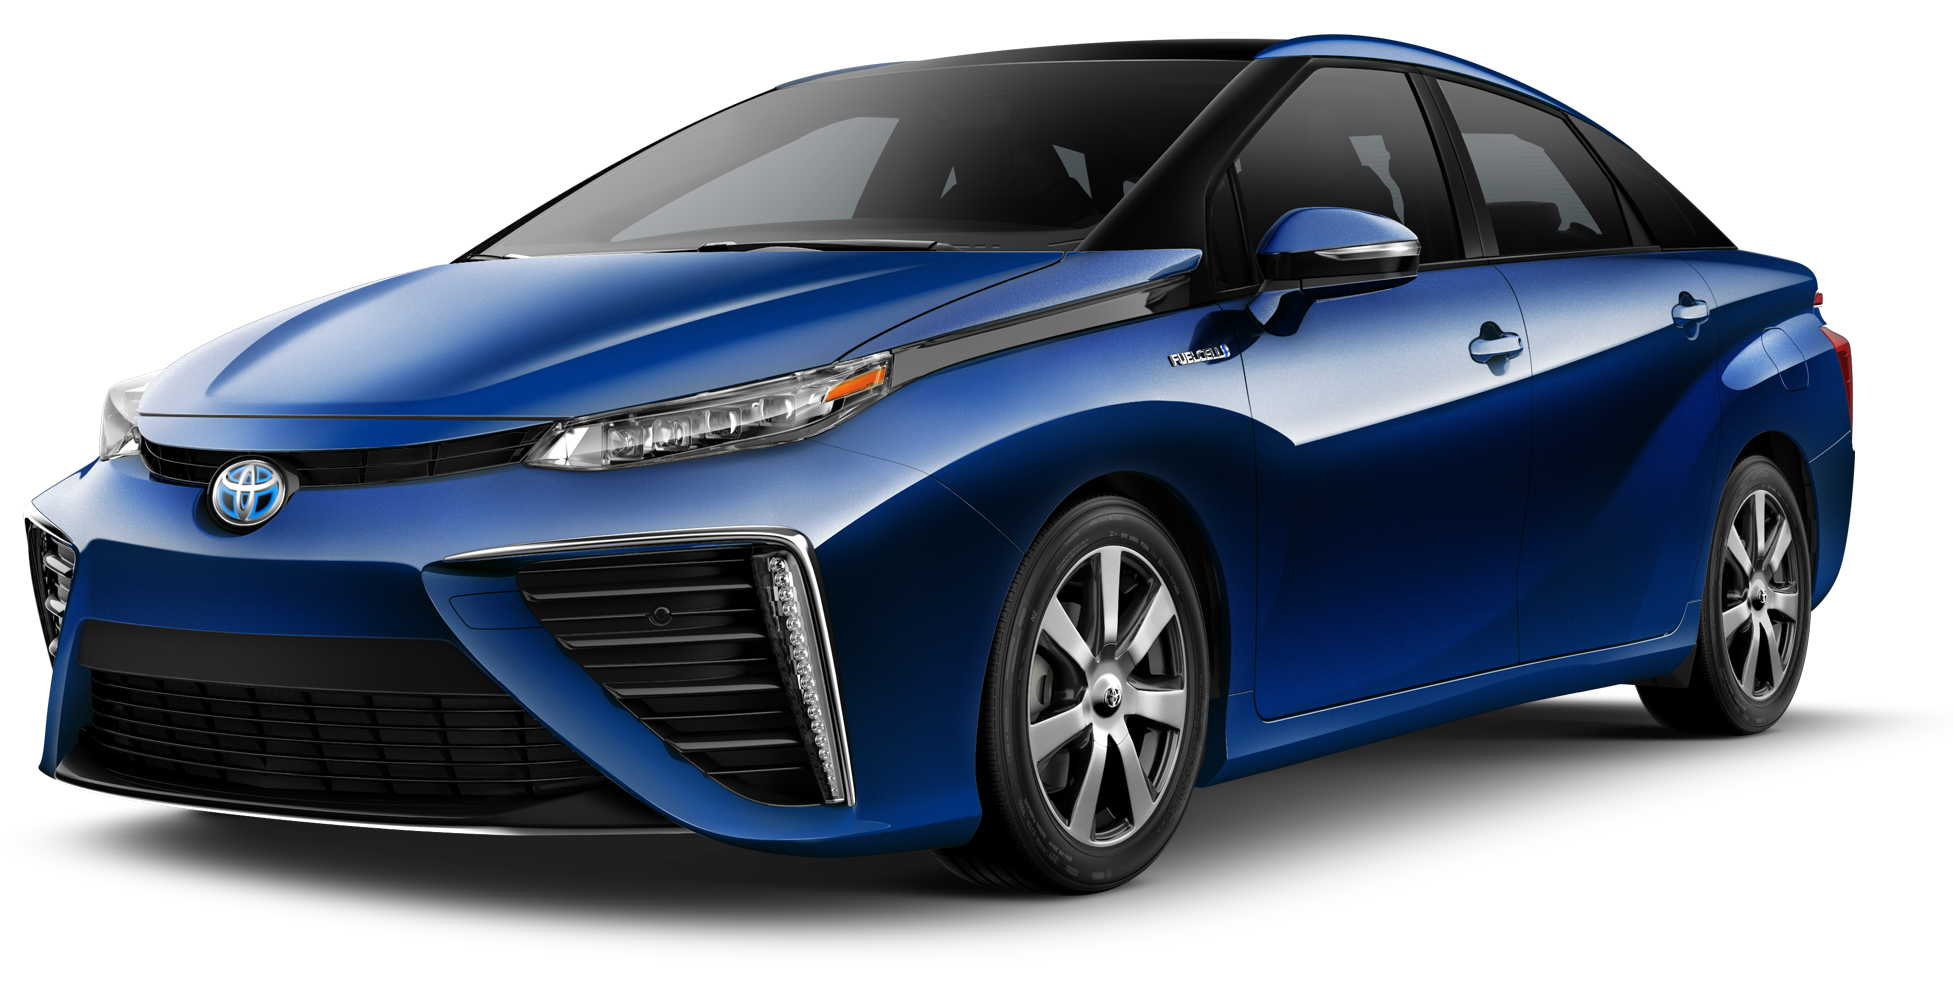 2018 Toyota Mirai Incentives, Specials & Offers in Bakersfield CA